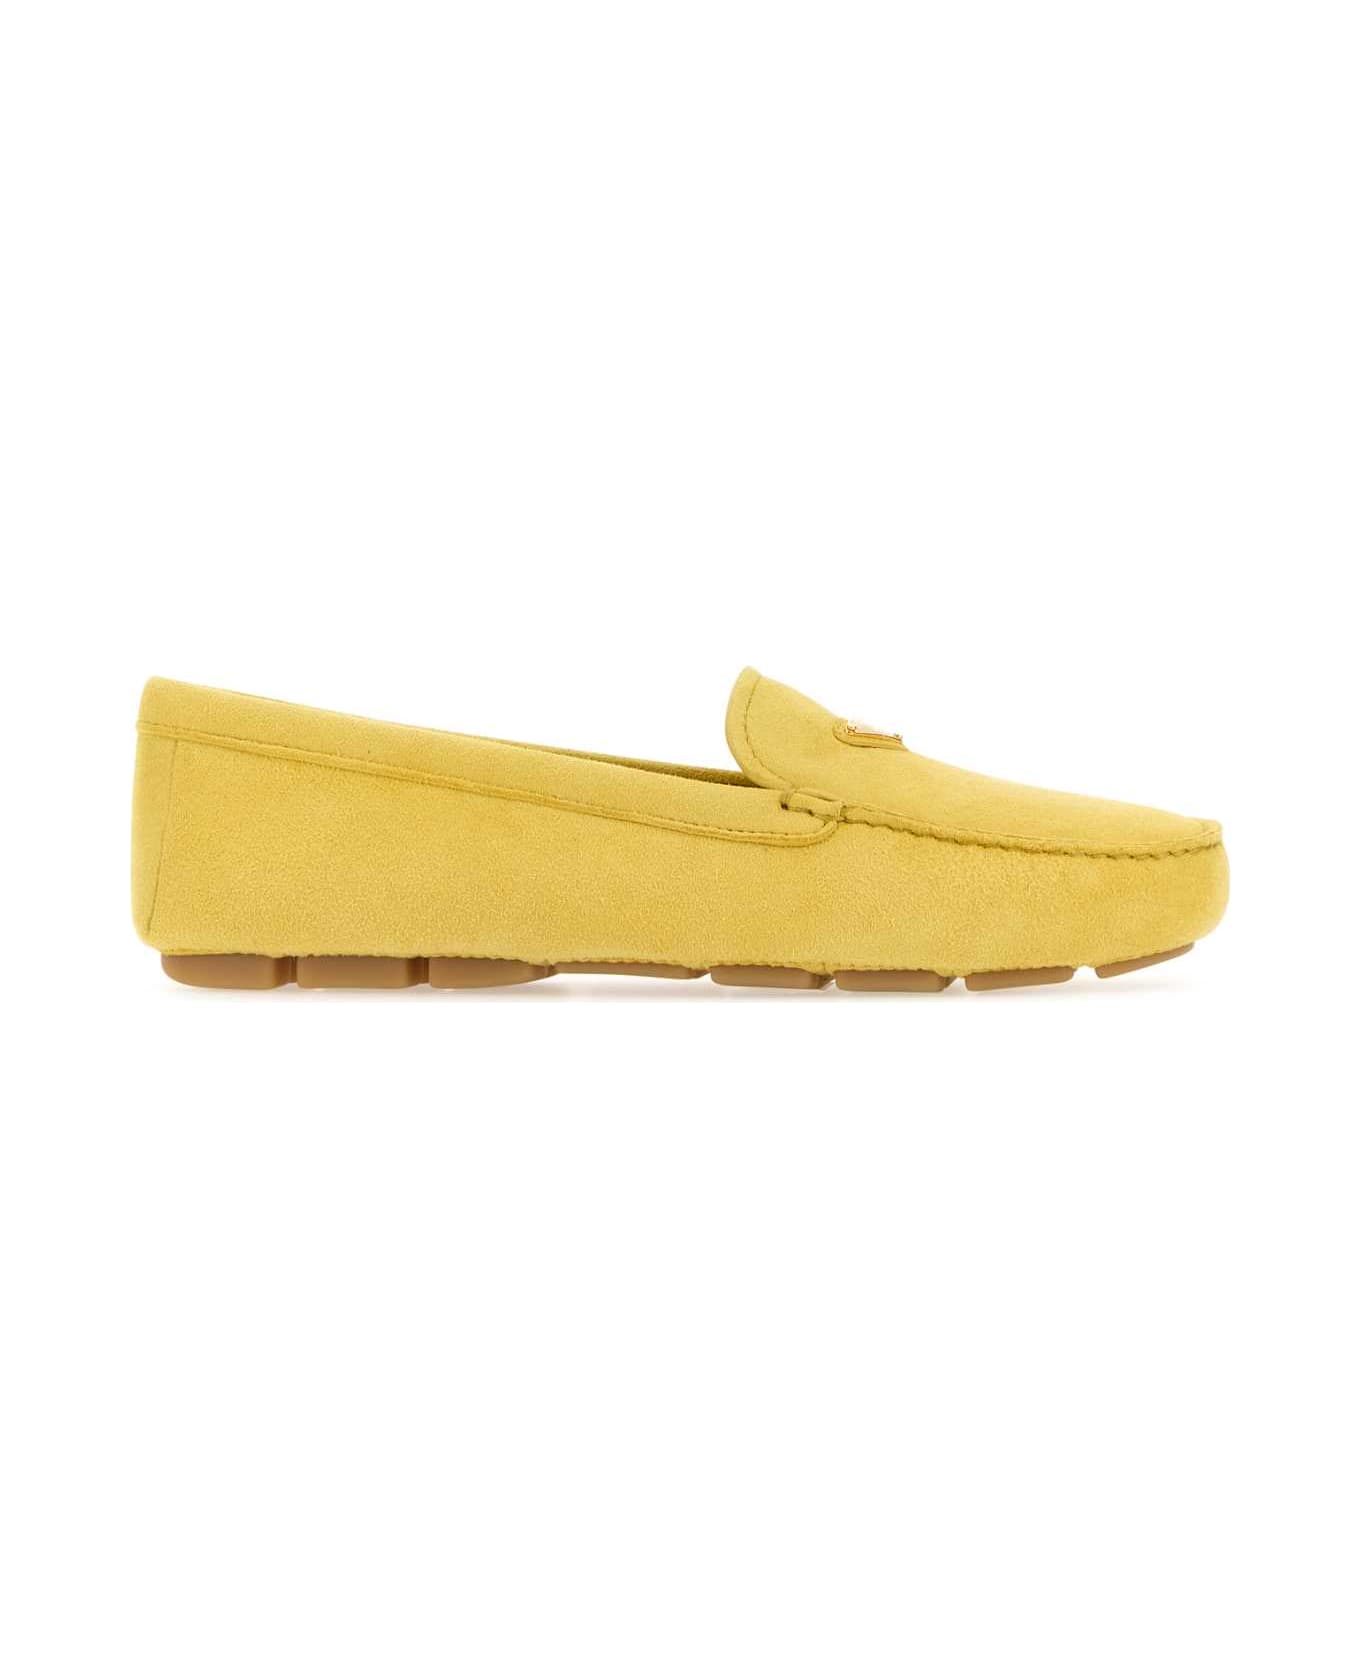 Prada Yellow Suede Loafers - SOLE フラットシューズ